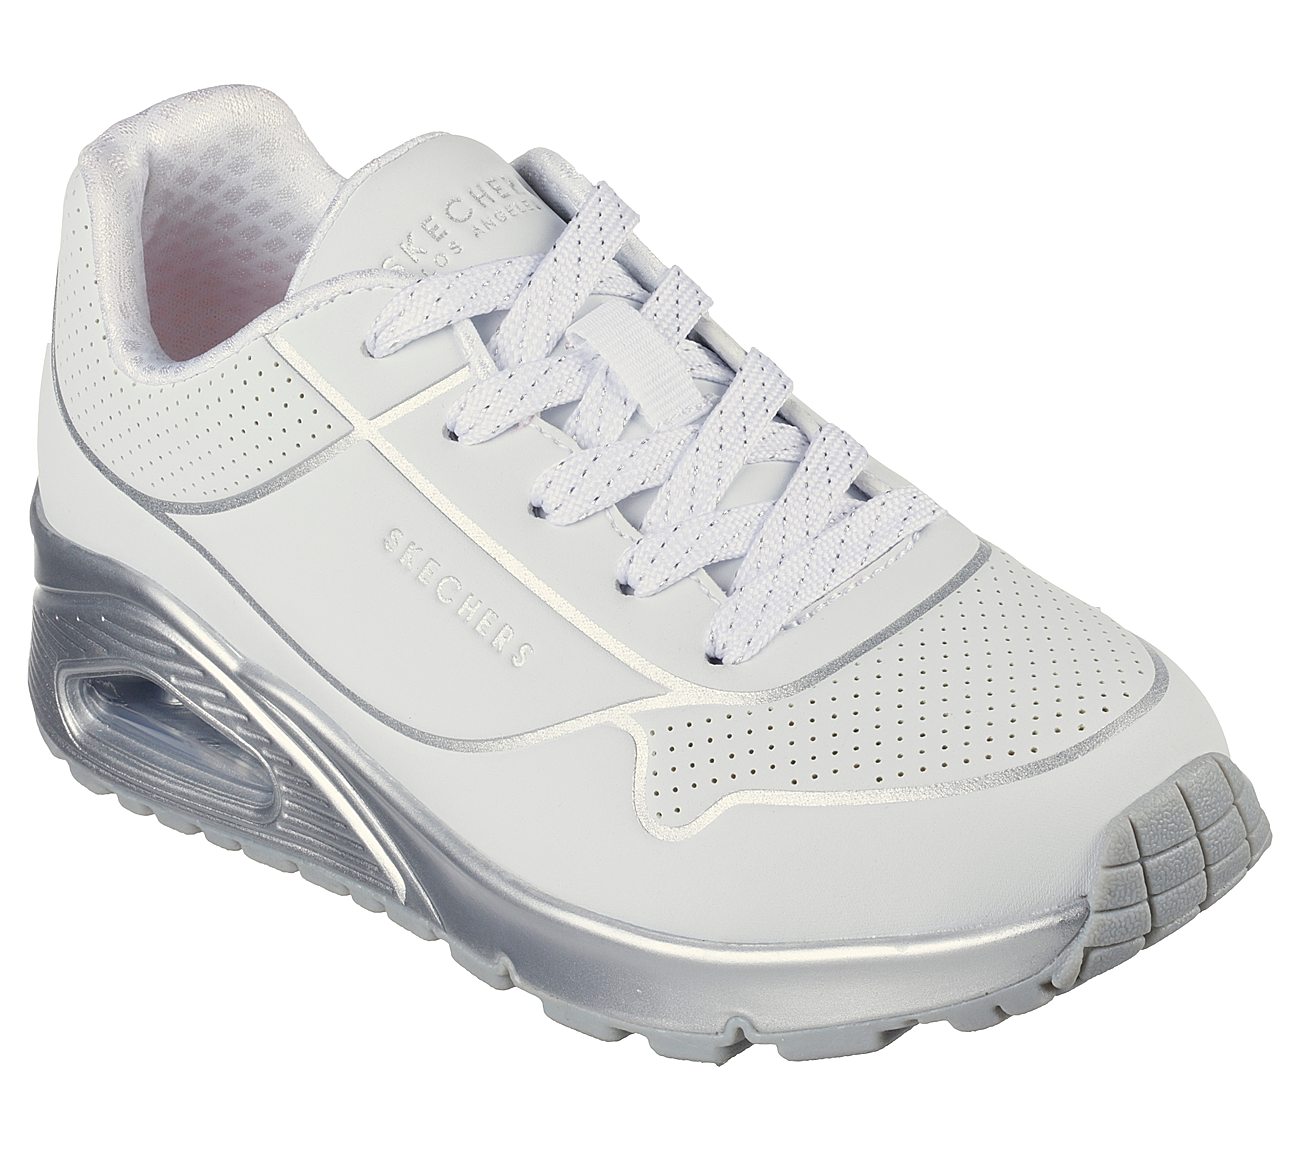 UNO GEN1 - COOL HEELS, WHITE/SILVER Footwear Lateral View